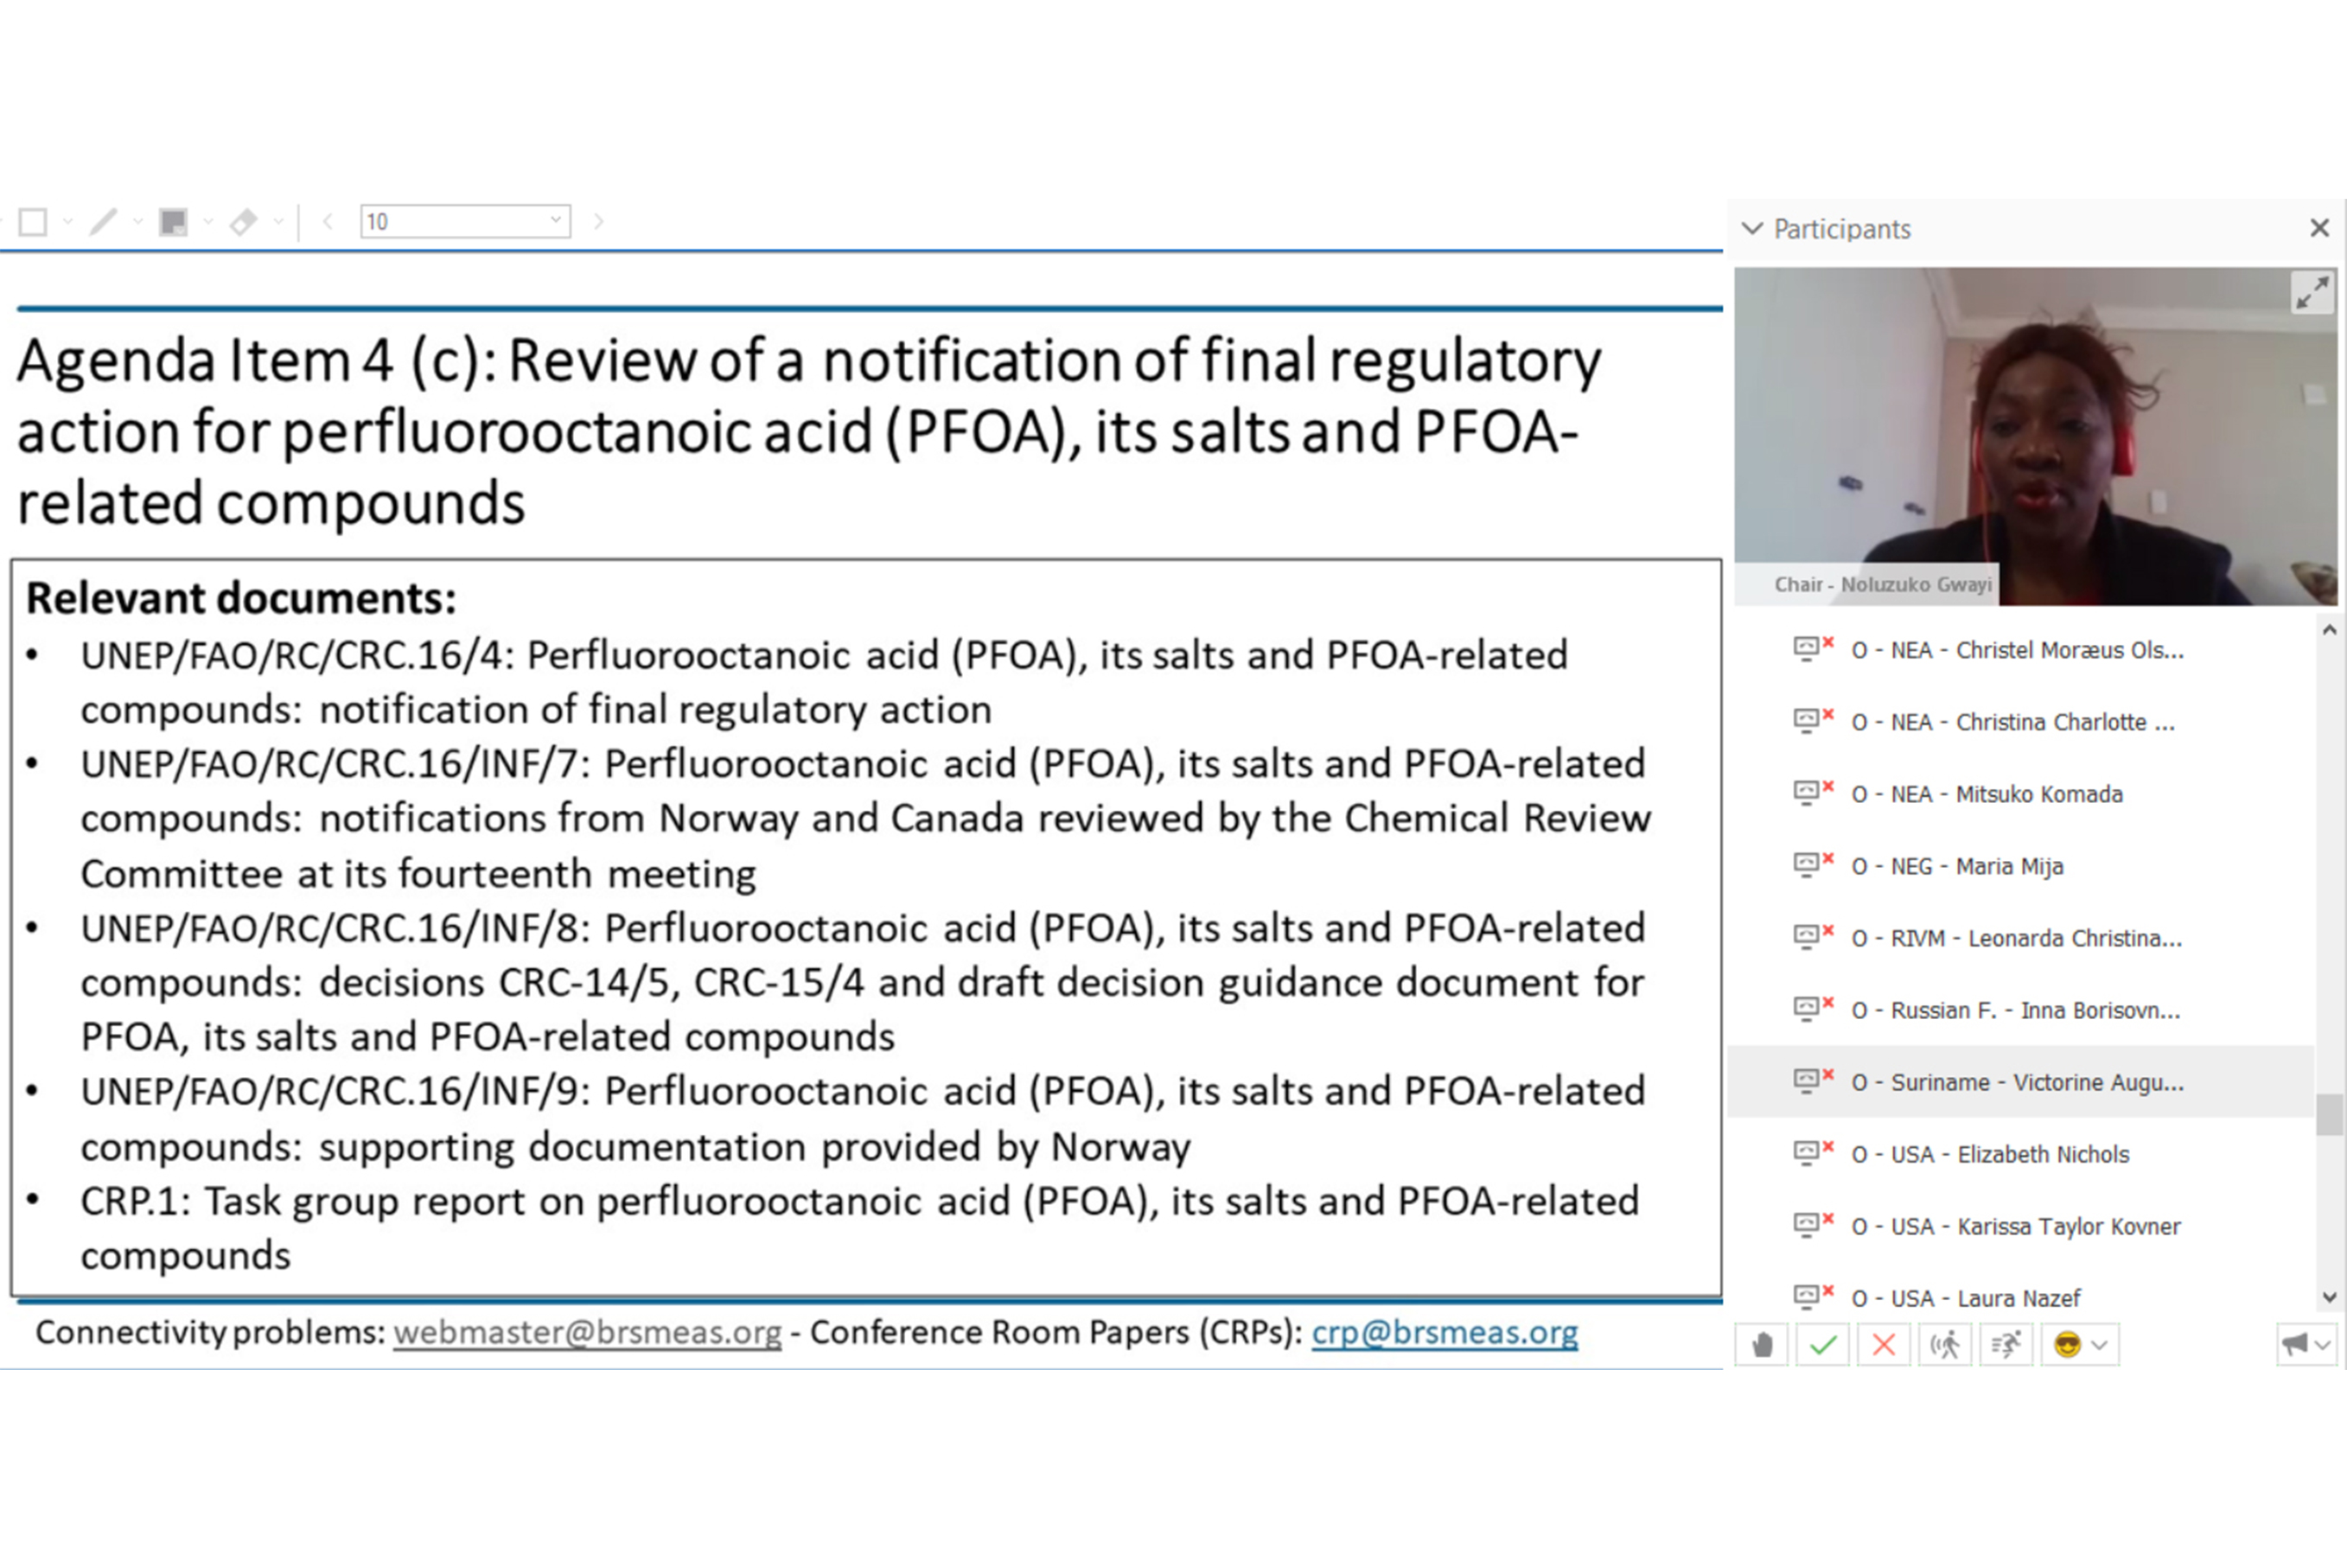 Delegates spent most of Tuesday’s session discussing Norway’s notification of final regulatory action PFOA, its salts and PFOA-related compounds.